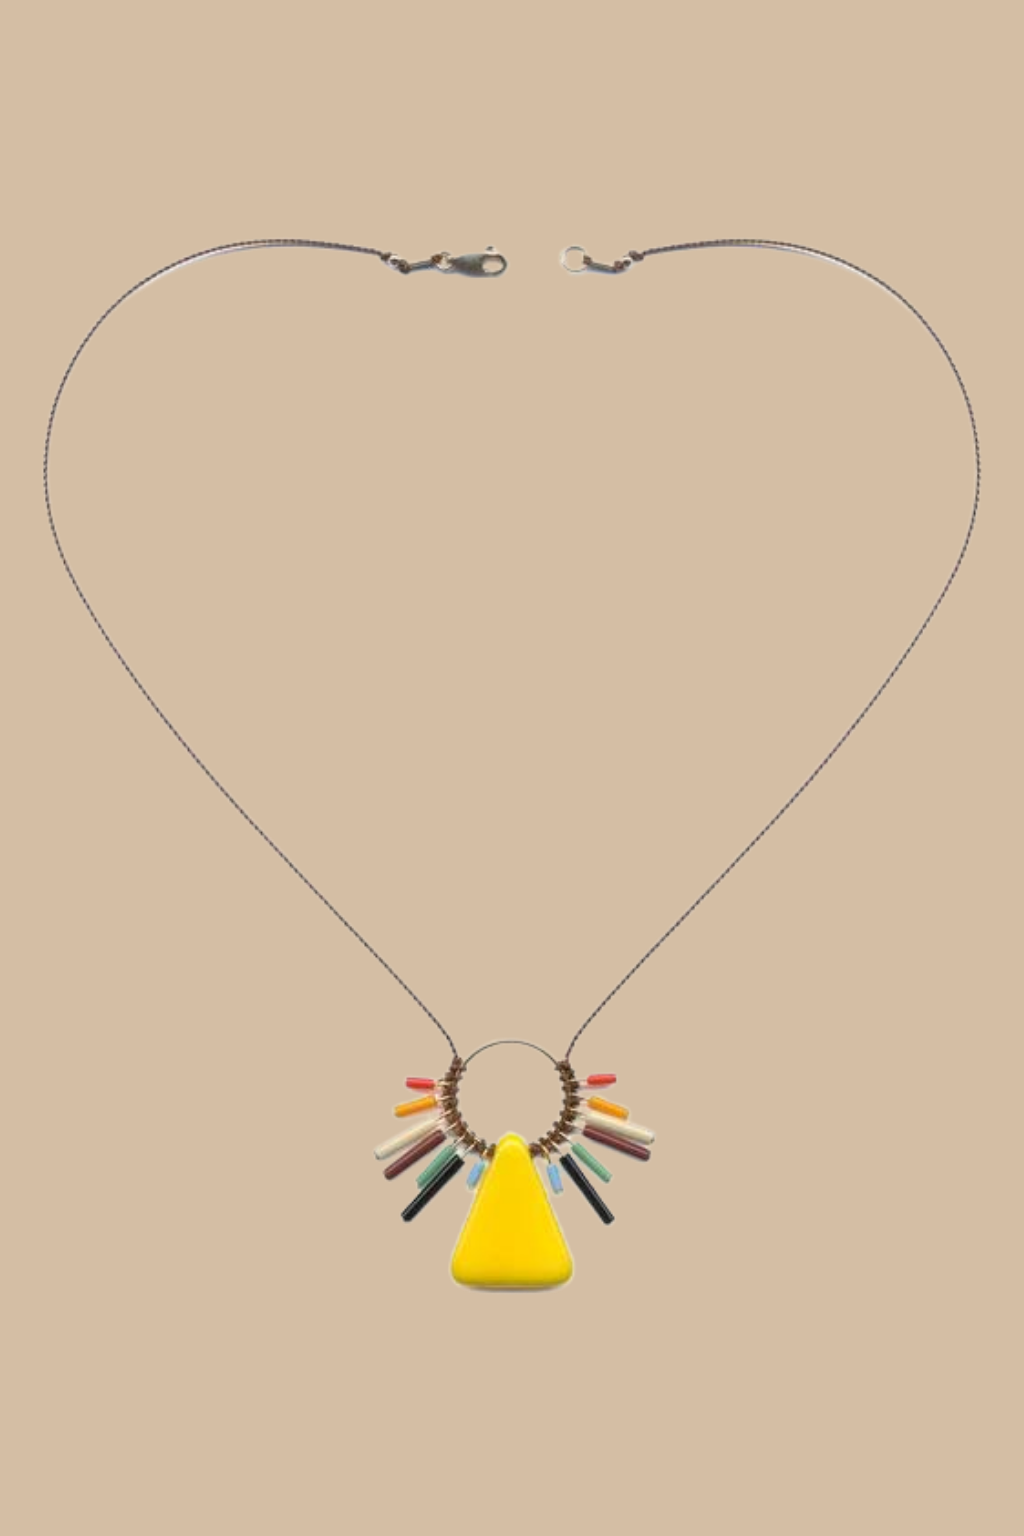 Hilma af Klimt Necklace with Yellow Triangle